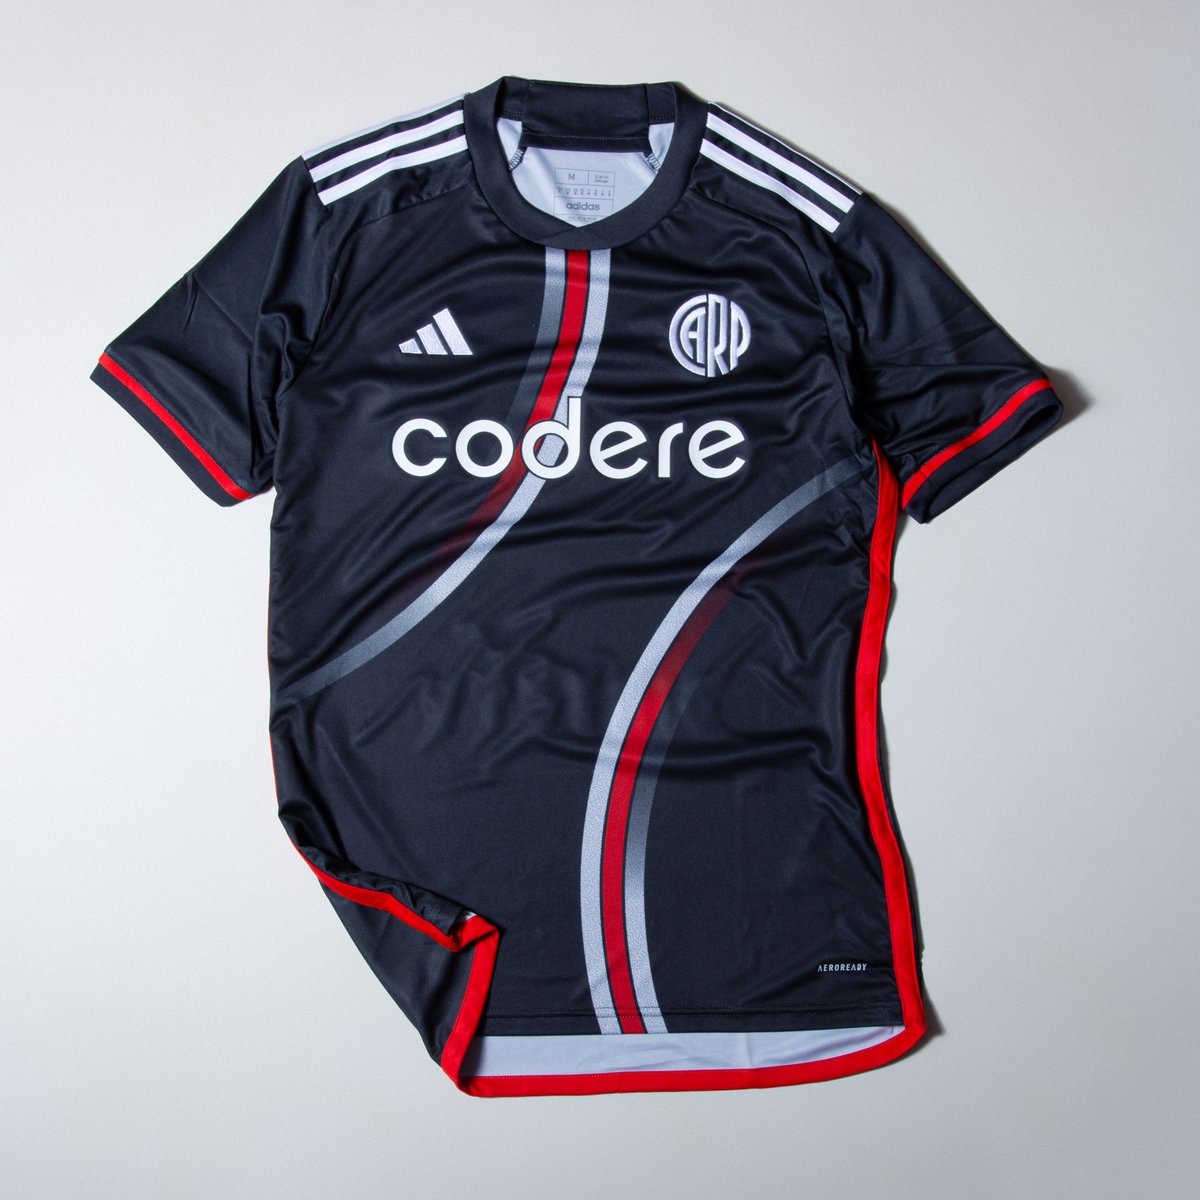 New in 👀 We know we've got some River Plate fans out there. What do you think of this one? Shop the new third shirt here 👇 subsidesports.com/uk/adidas-rive…